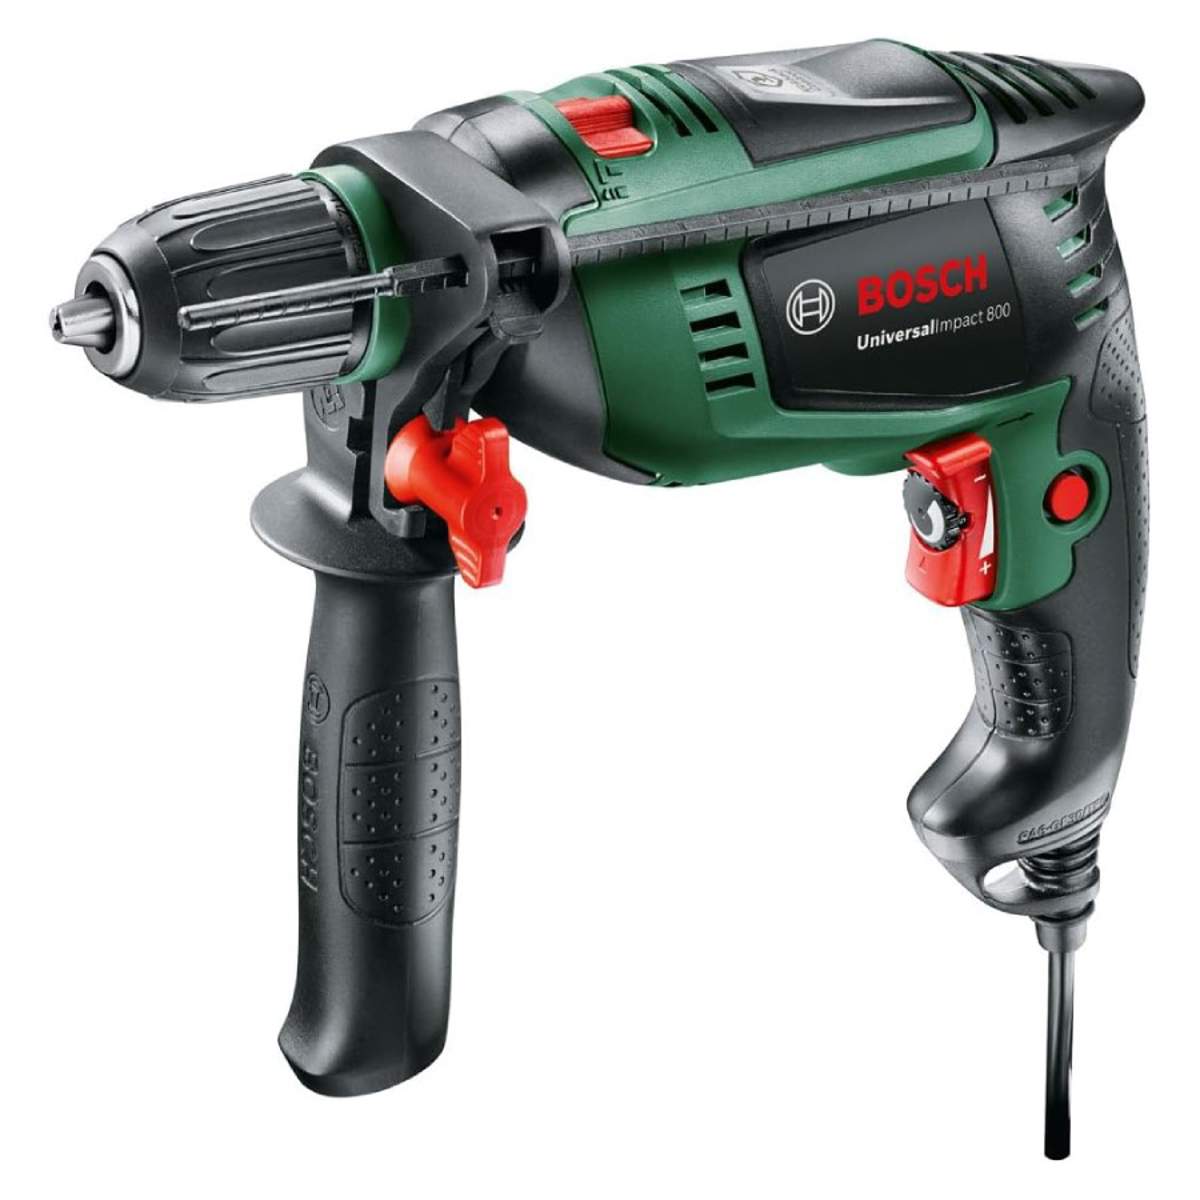 Bosch Home and Garden Universal 800 - Producto